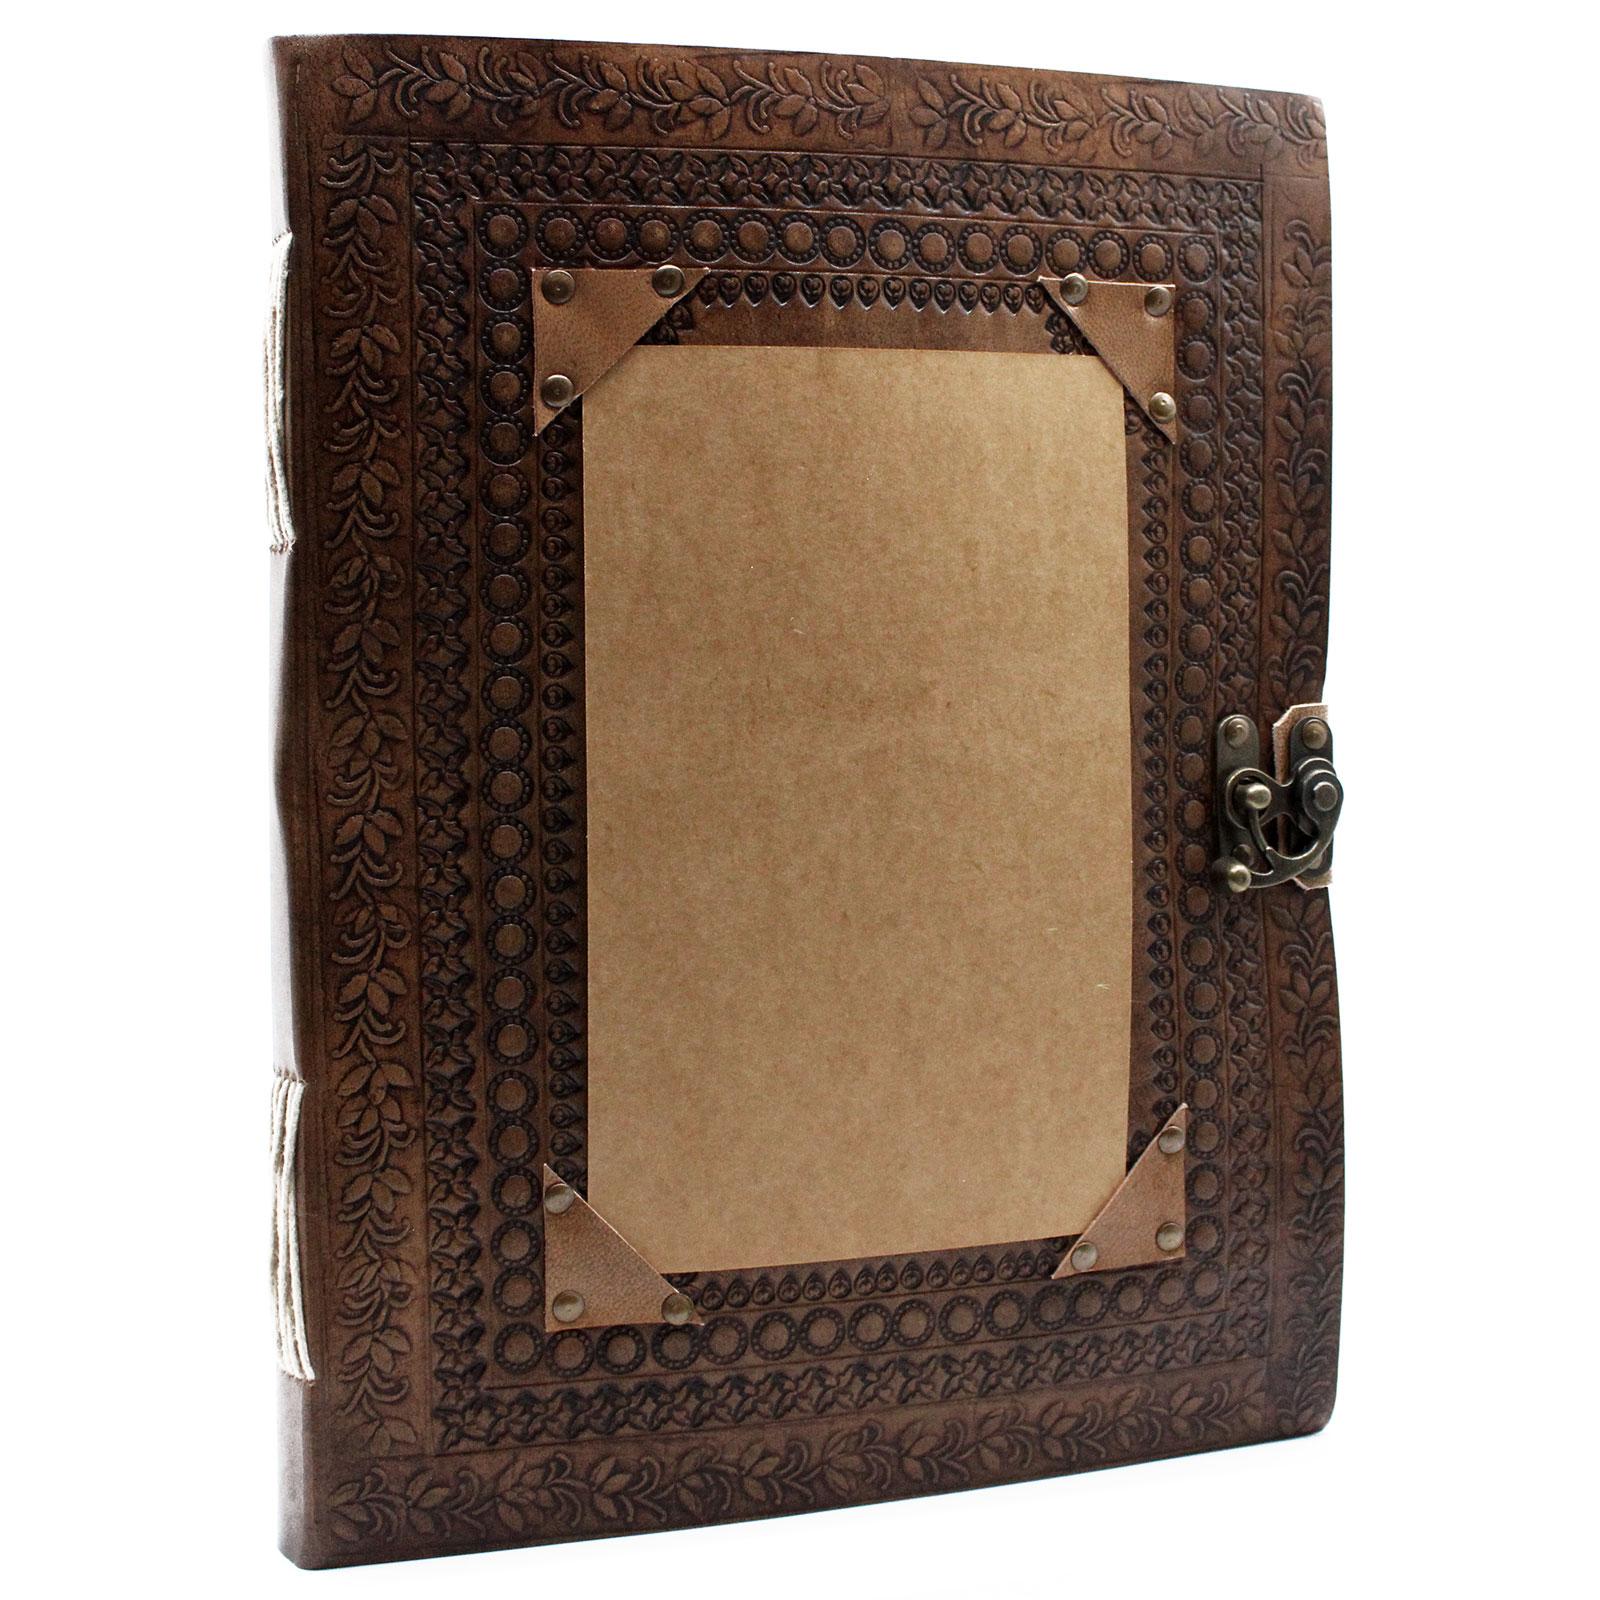 Large Leather Bound Customisable Journal (10"x13")